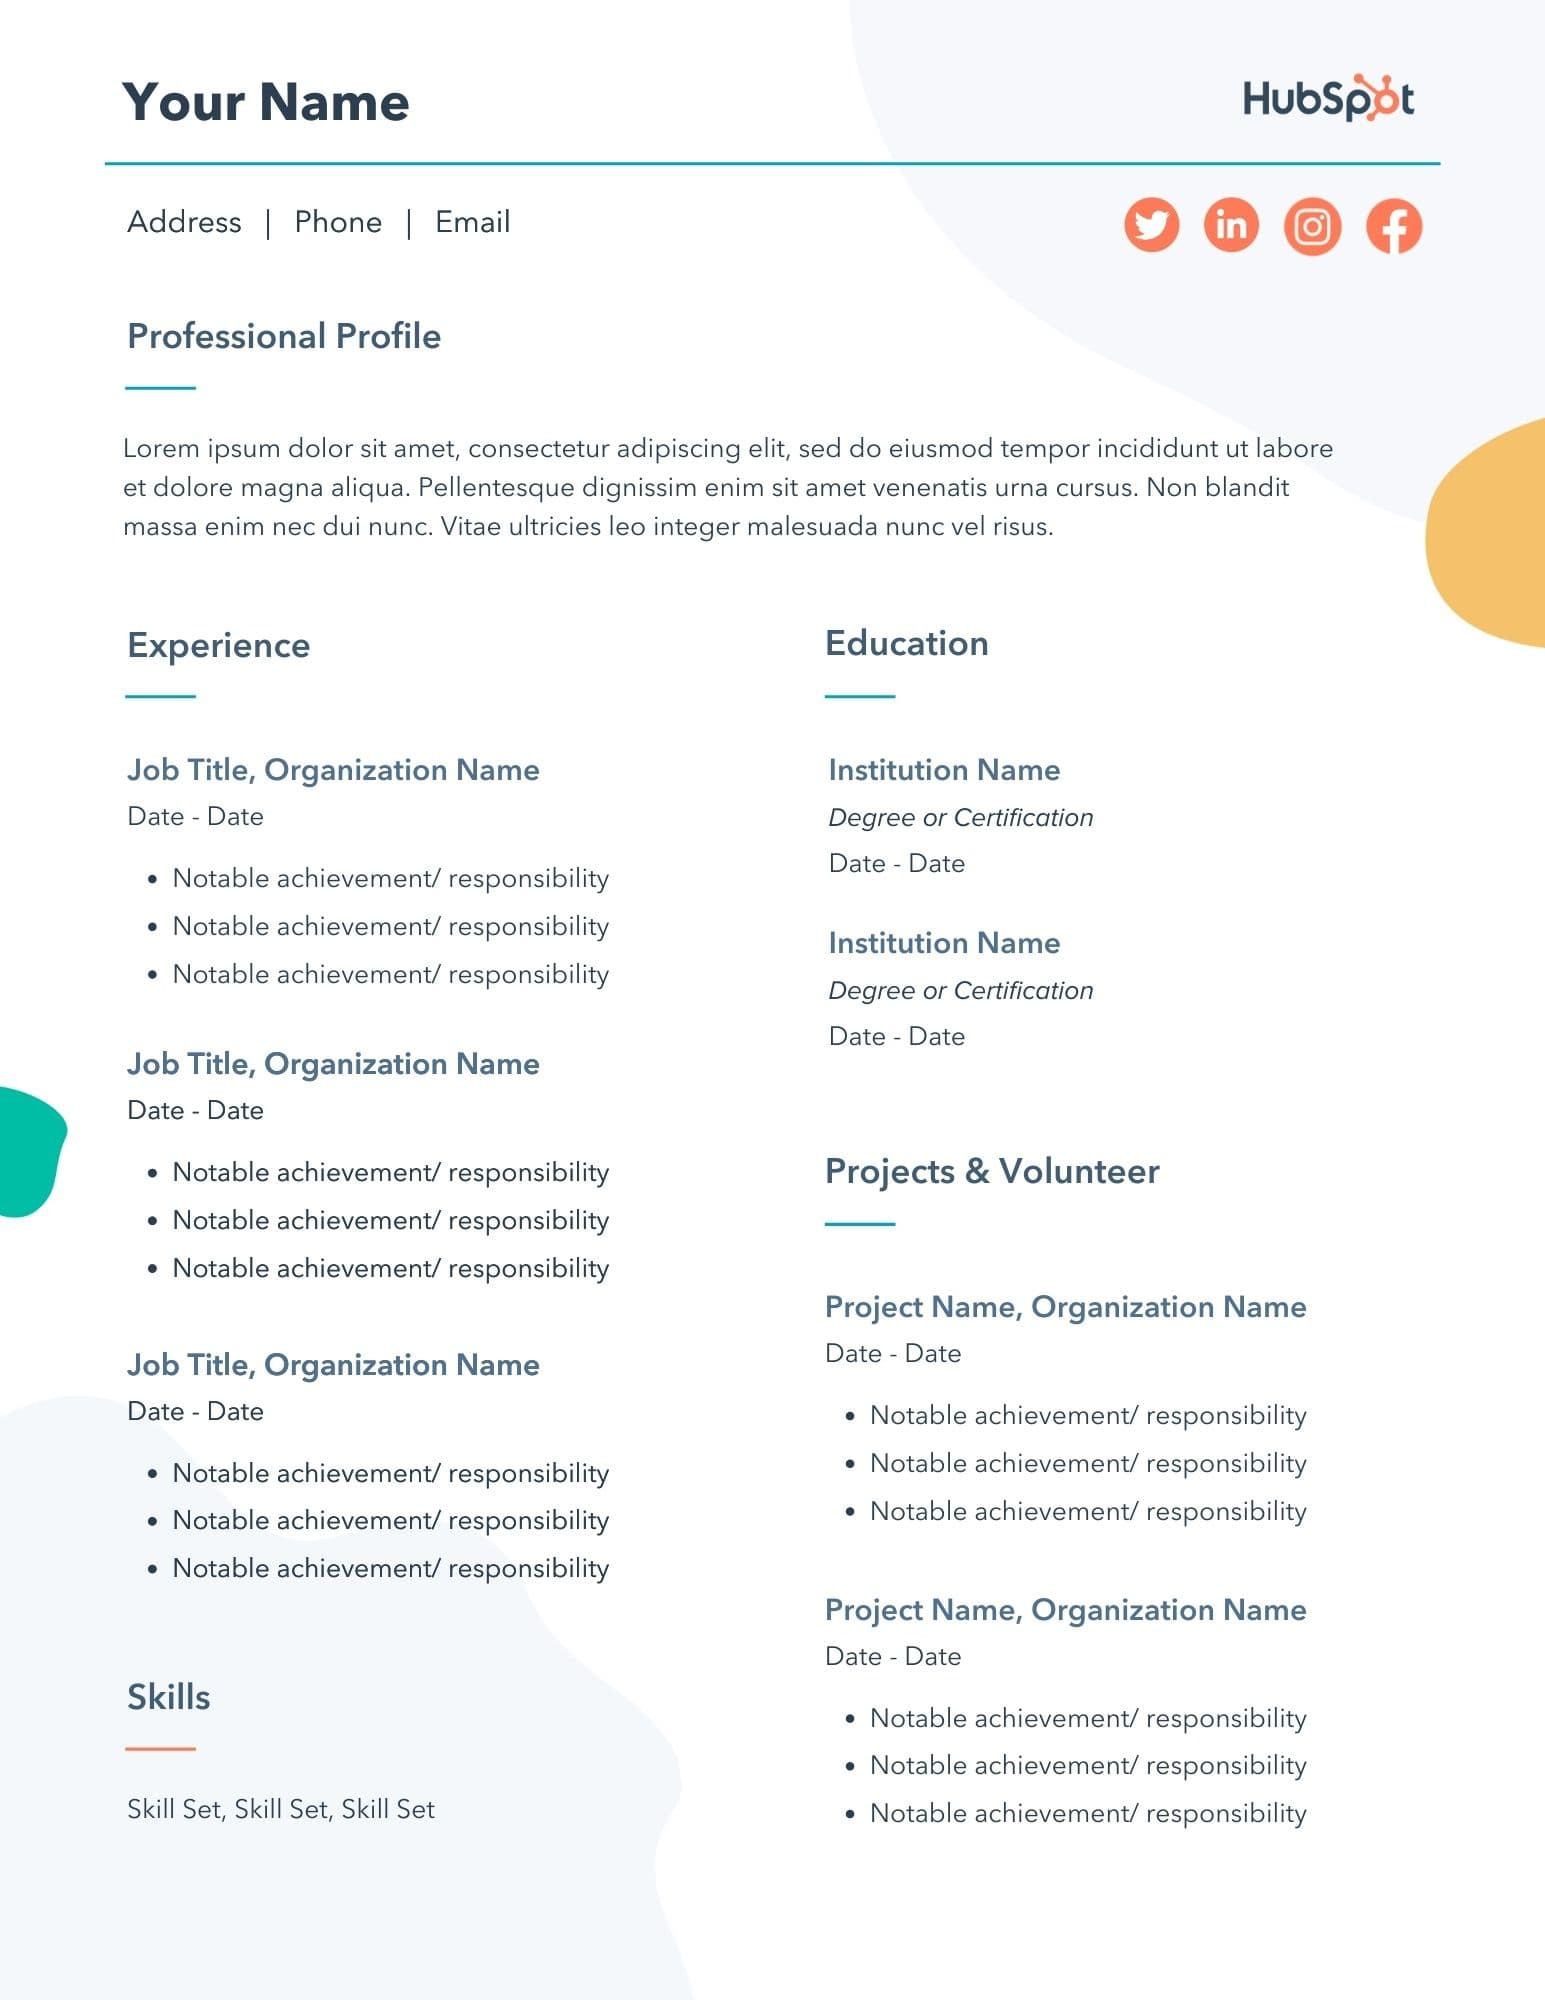 Resume Template for Lots Of Experience 29 Free Resume Templates for Microsoft Word (& How to Make Your Own)